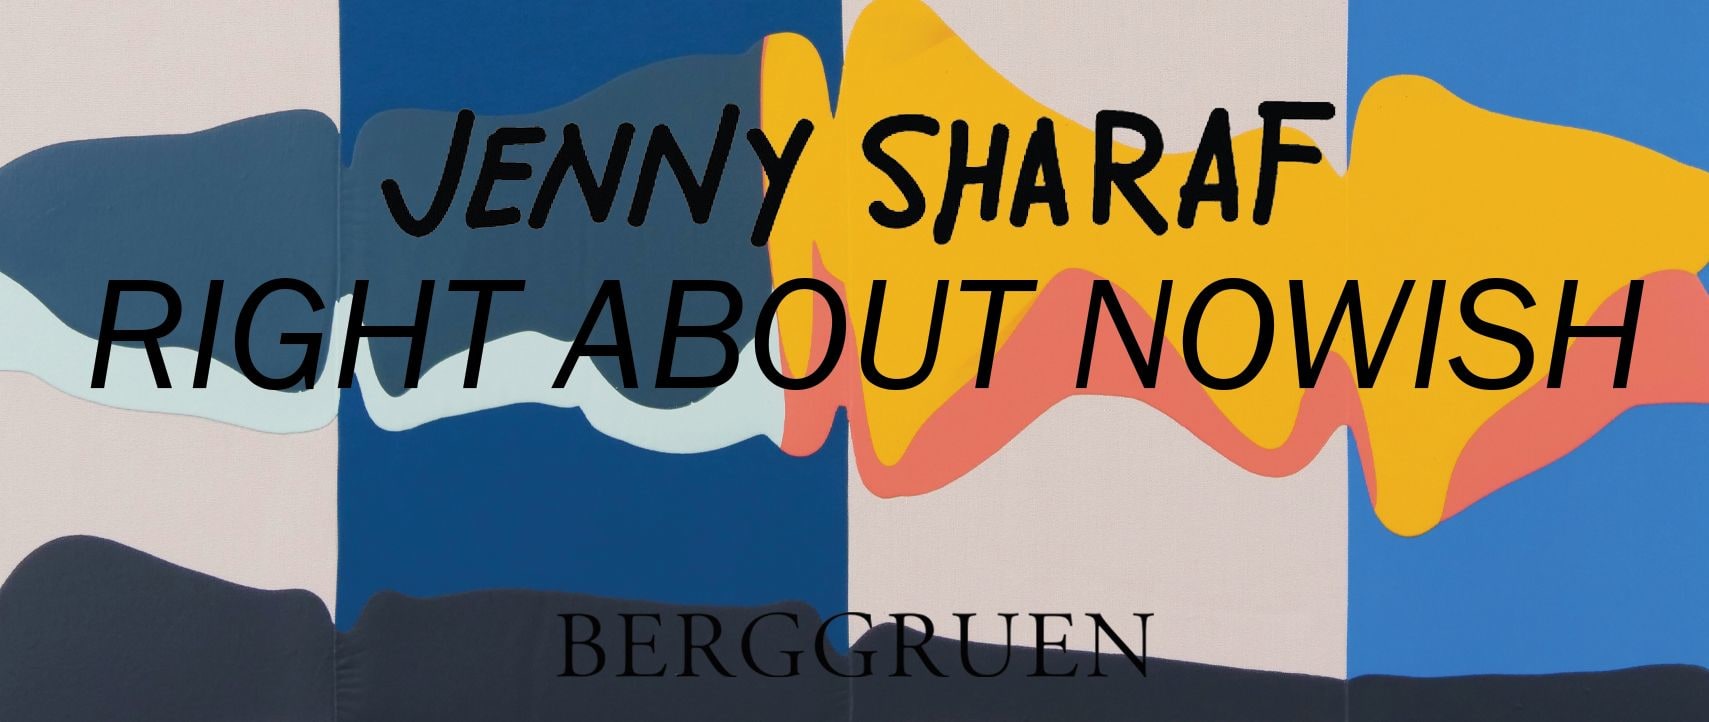 Jenny Sharaf - RIGHT ABOUT NOWISH - Viewing Room - Berggruen Gallery Viewing Room